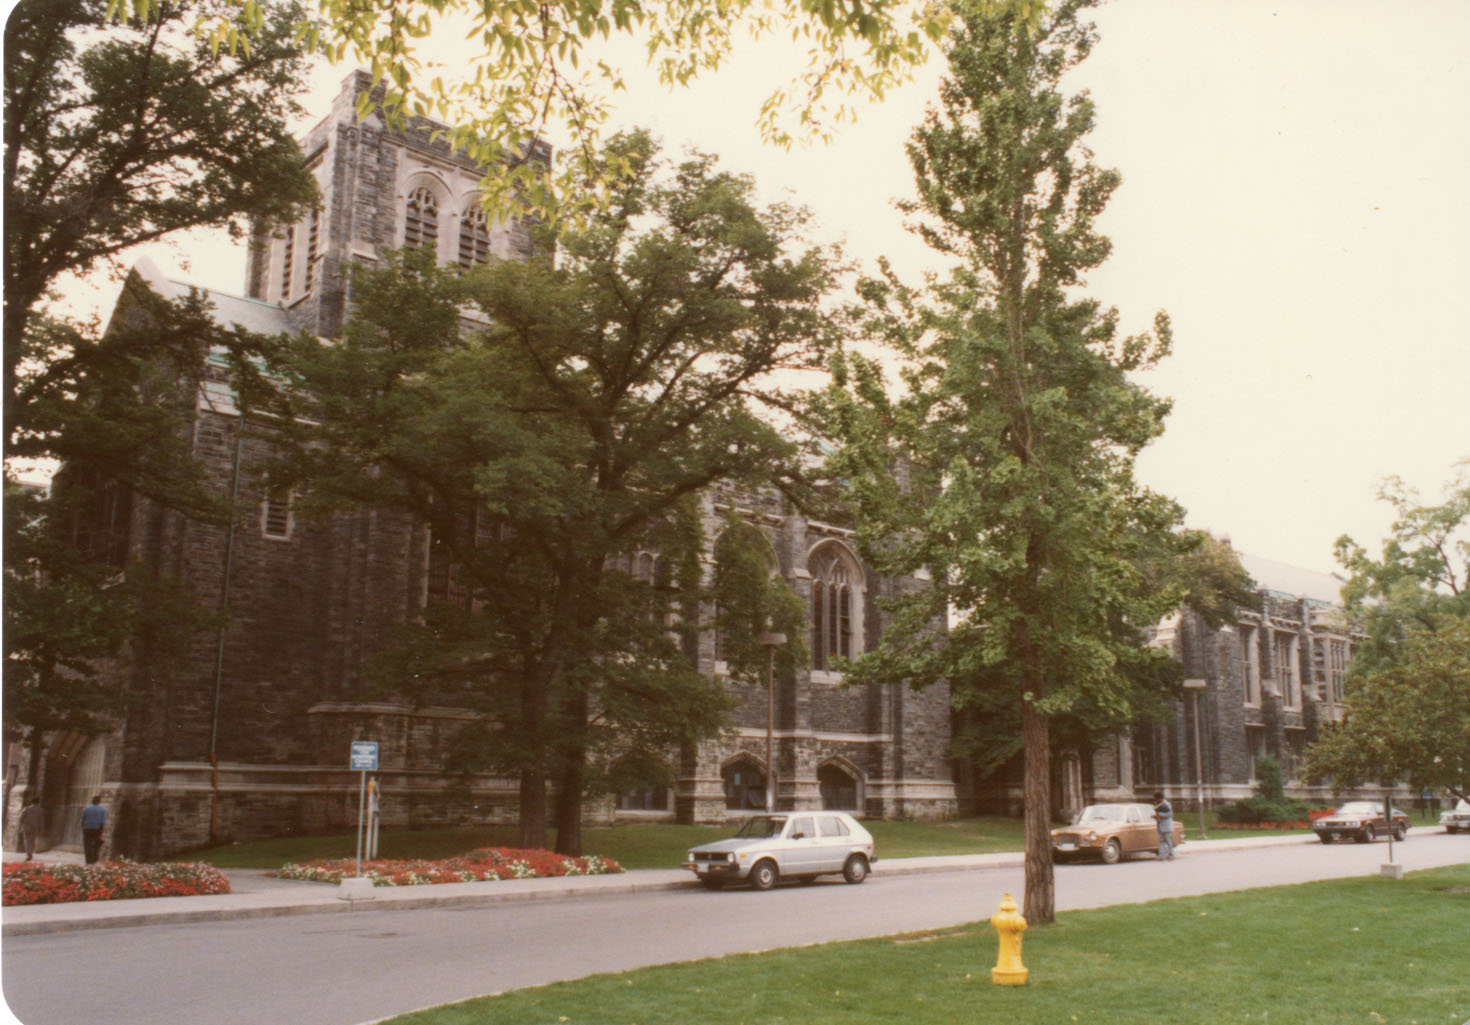 The front of the college as seen from King's College Circle.